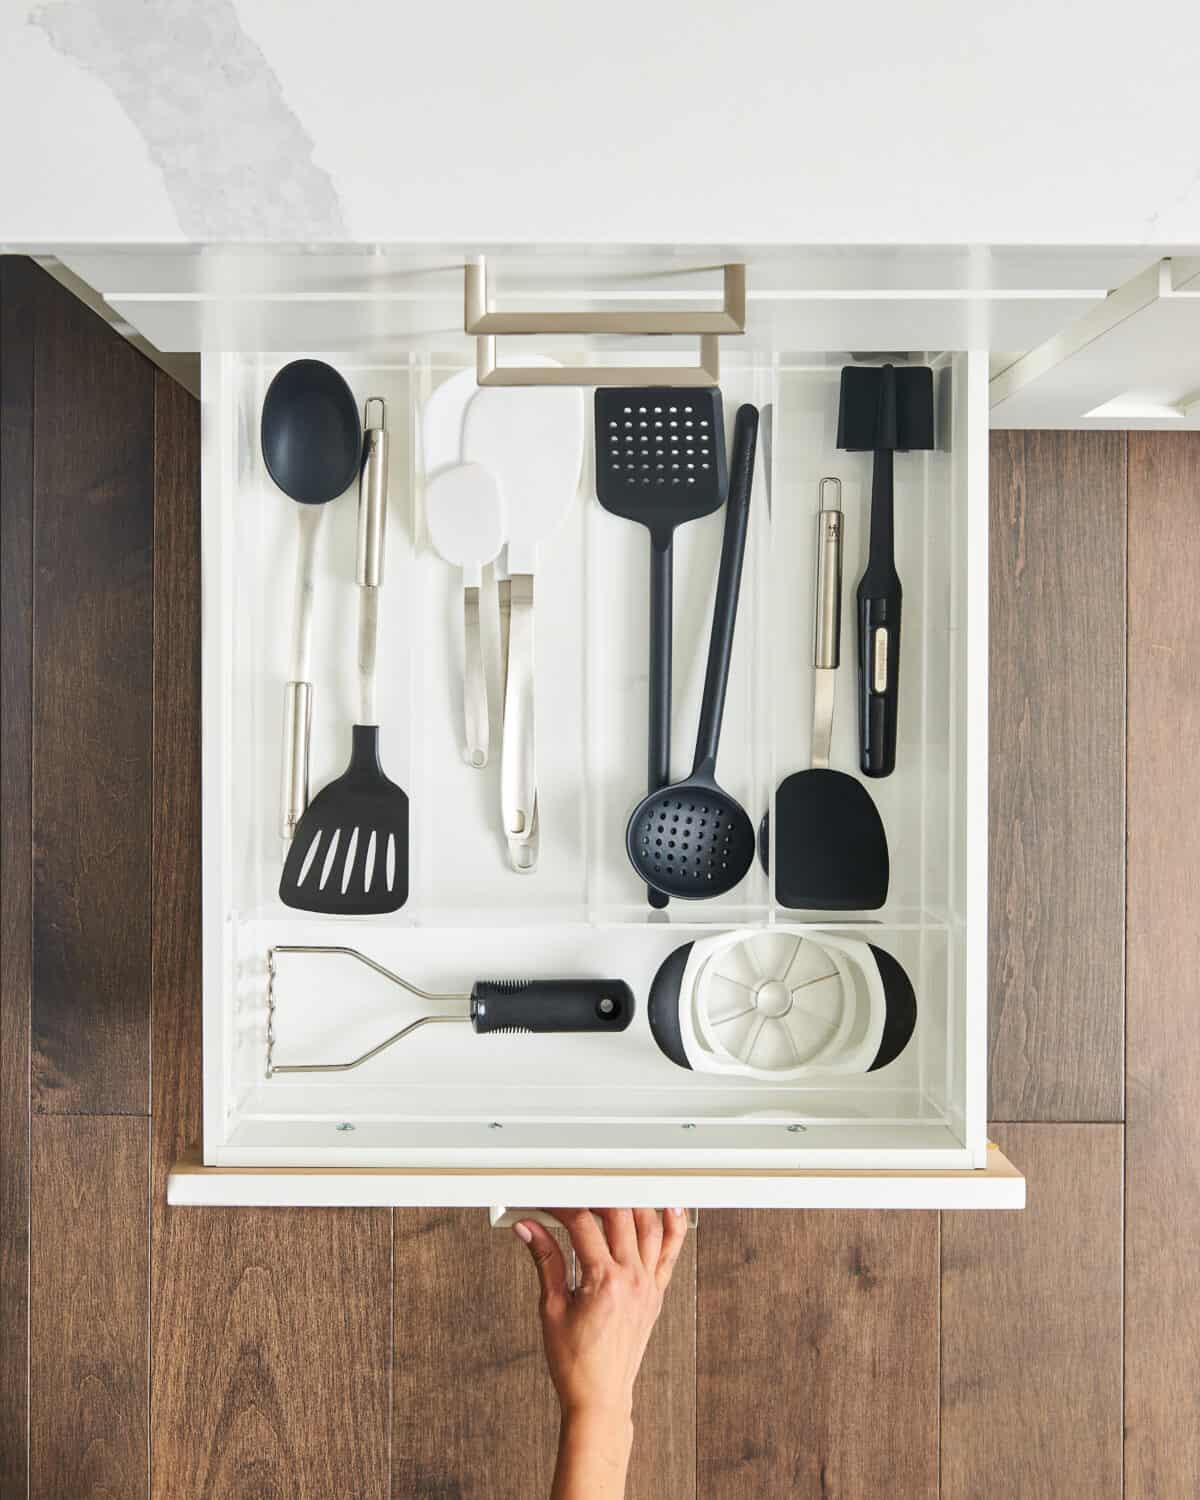 spatulas and other kitchen tools in a drawer.